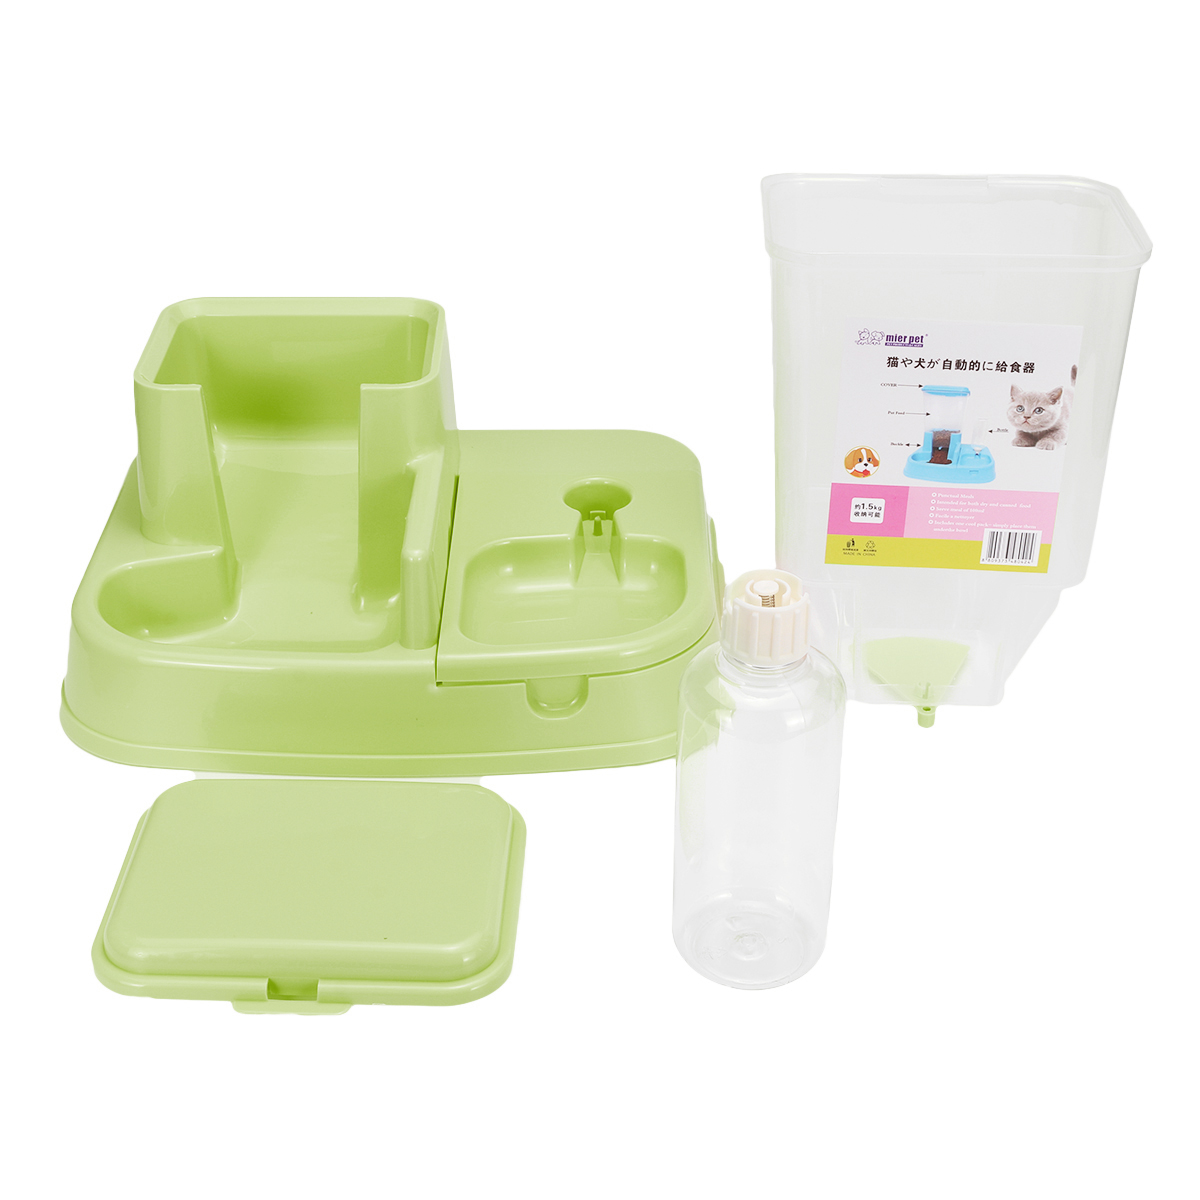 2-In-1-Large-Automatic-Pet-Dog-Cat-Puppy-Food-Water-Dish-Bowl-Dispenser-Feeder-1692865-10